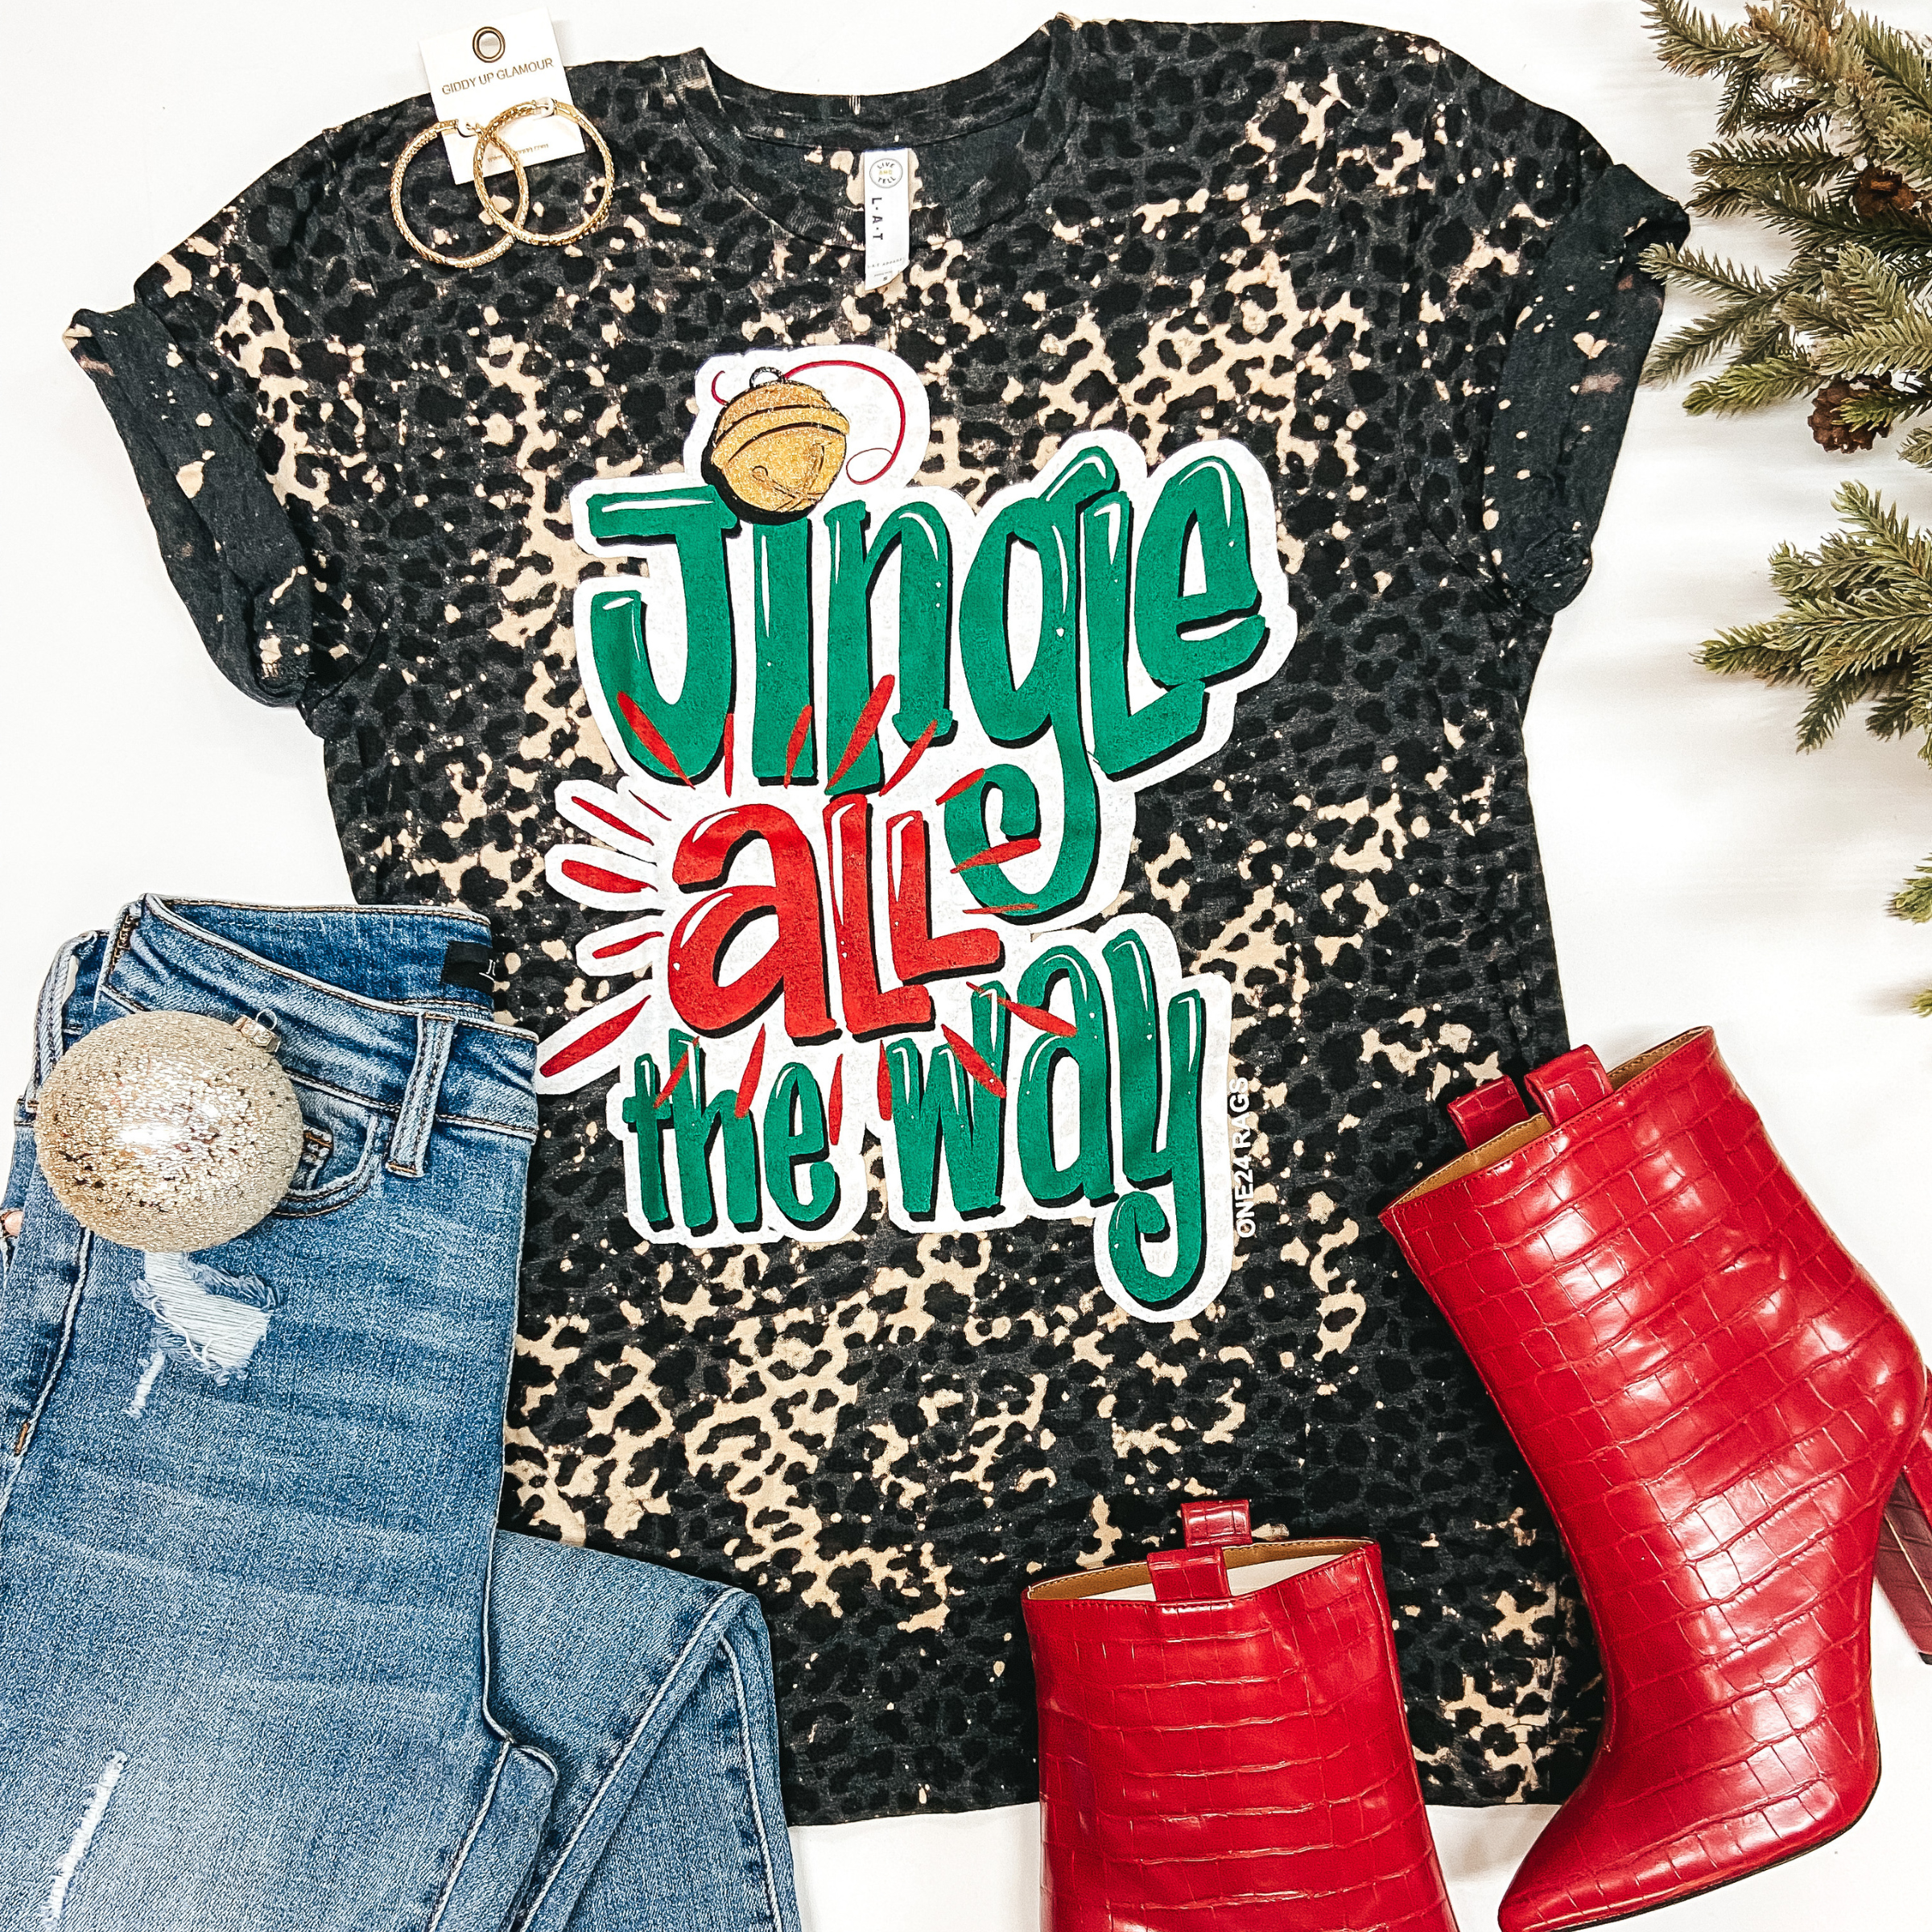 A charcoal grey tee shirt with short sleeves and a crew neckline. This tee shirt has bleach splatter detailing underneath a black faux leopard print. The graphic on the front says "Jingle All The Way." Pictured on a white background with gold jewelry, red booties, and Christmas decor.